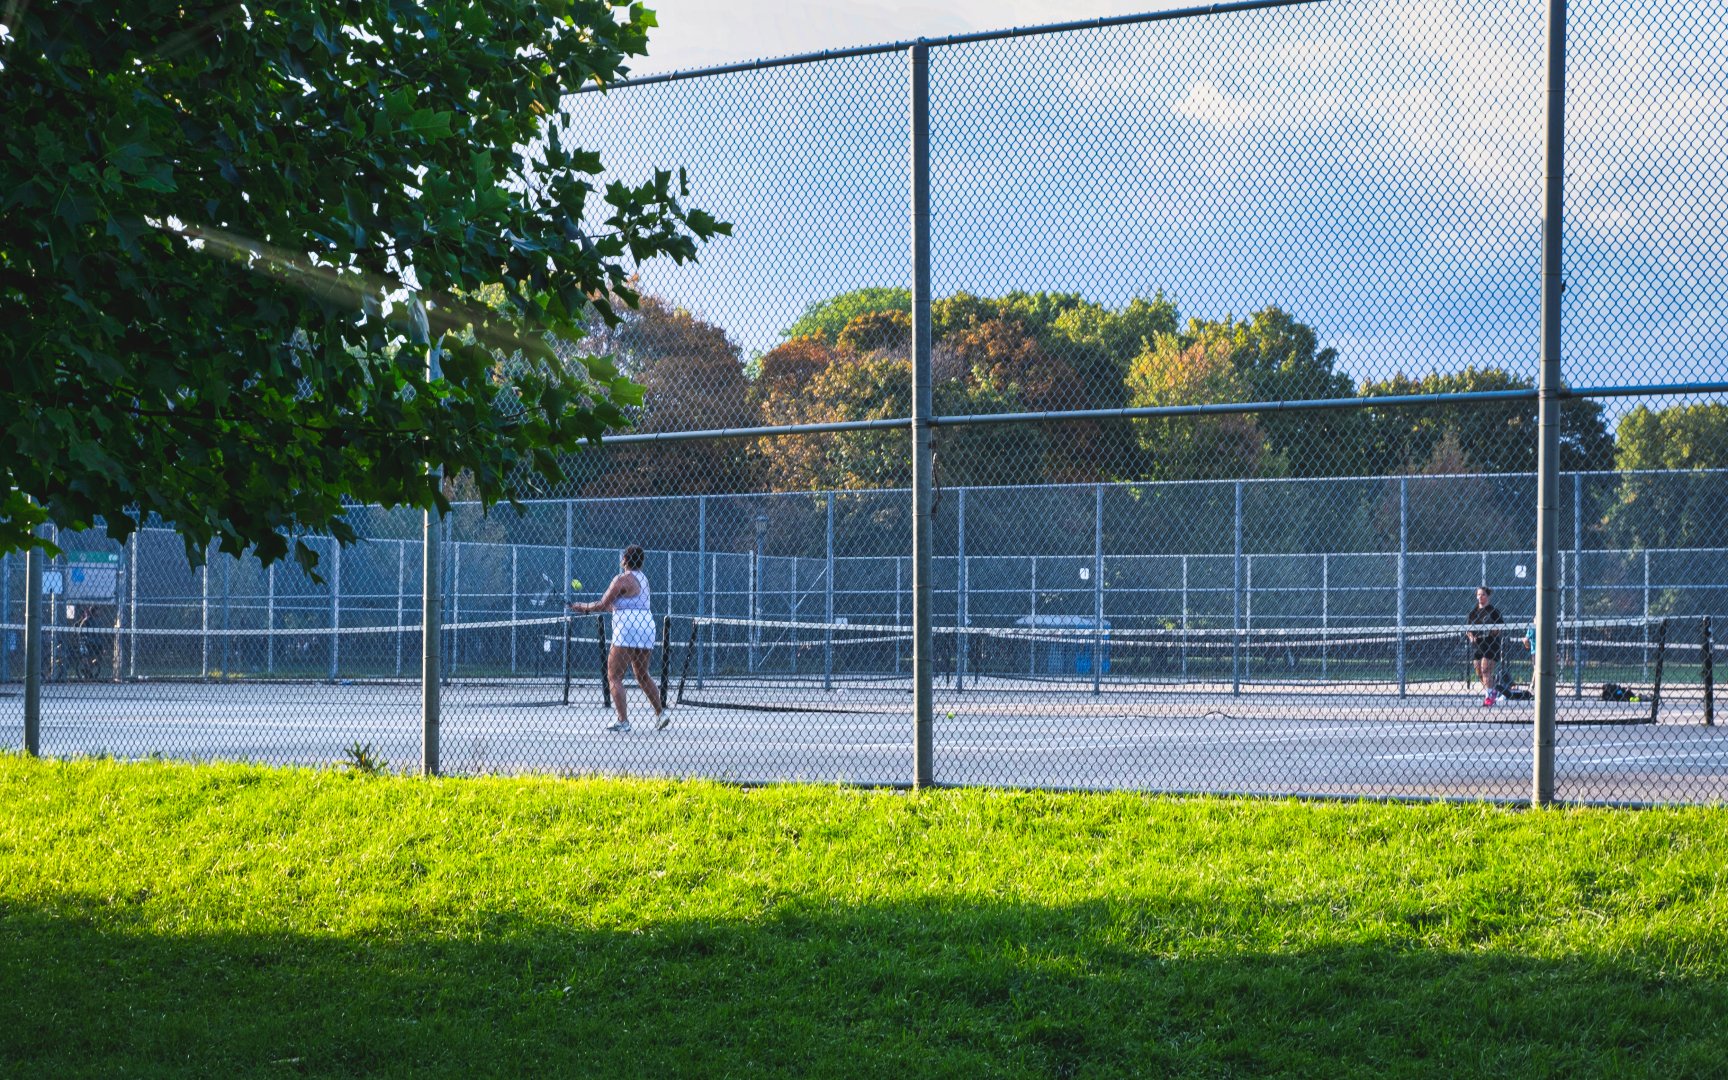 Trinity Bellwoods Park Tennis Courts (c) Photo by SHANE Maps exclusively for SHANE Maps